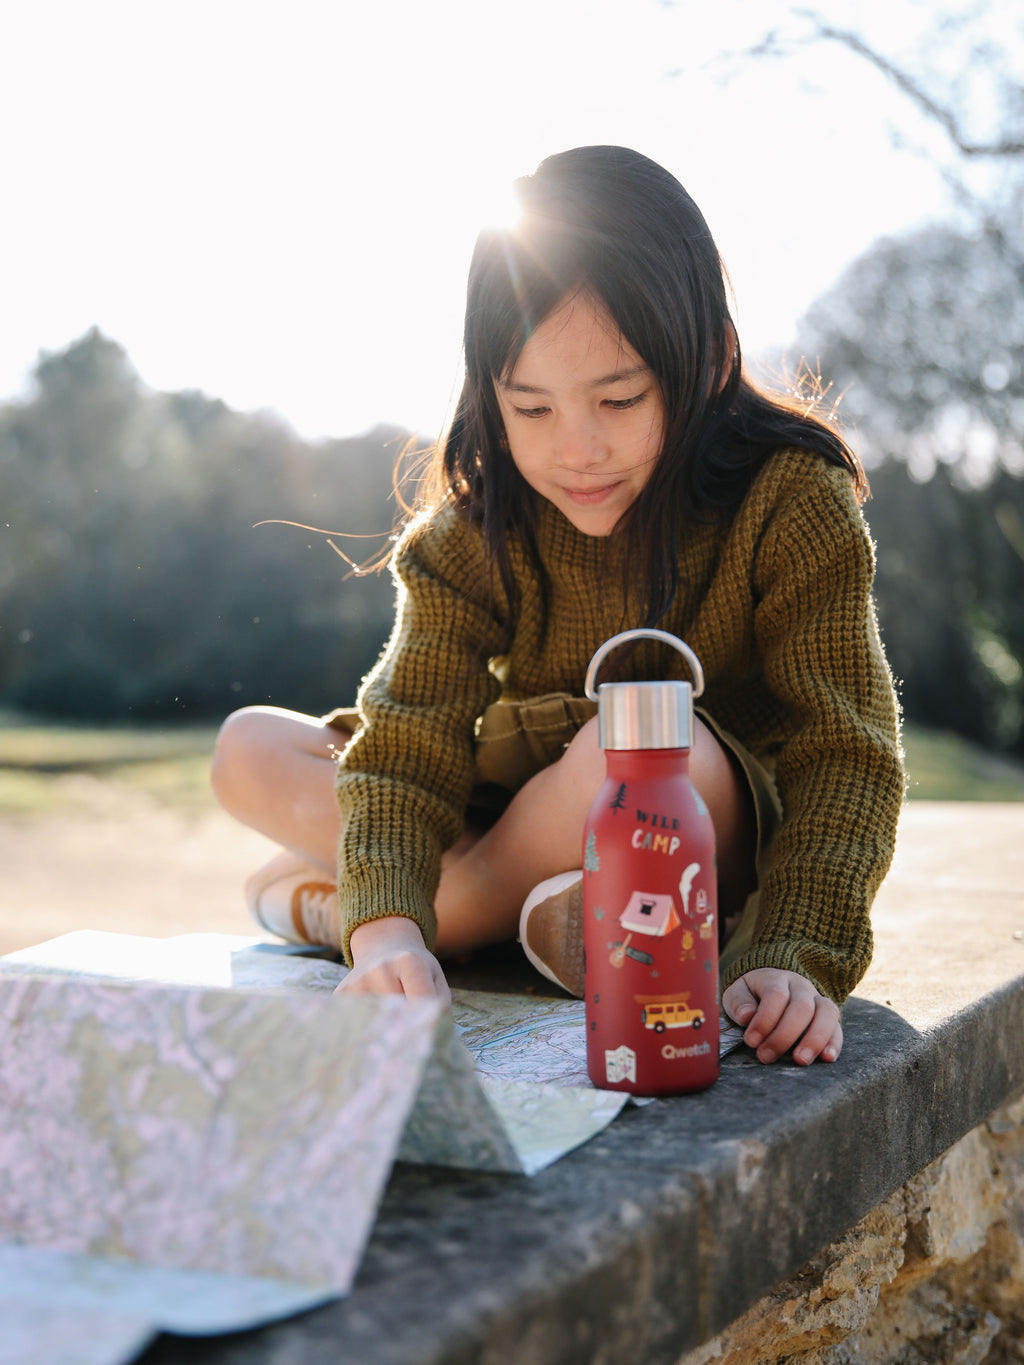 Isotherme Flasche - Kids Yosemite rot